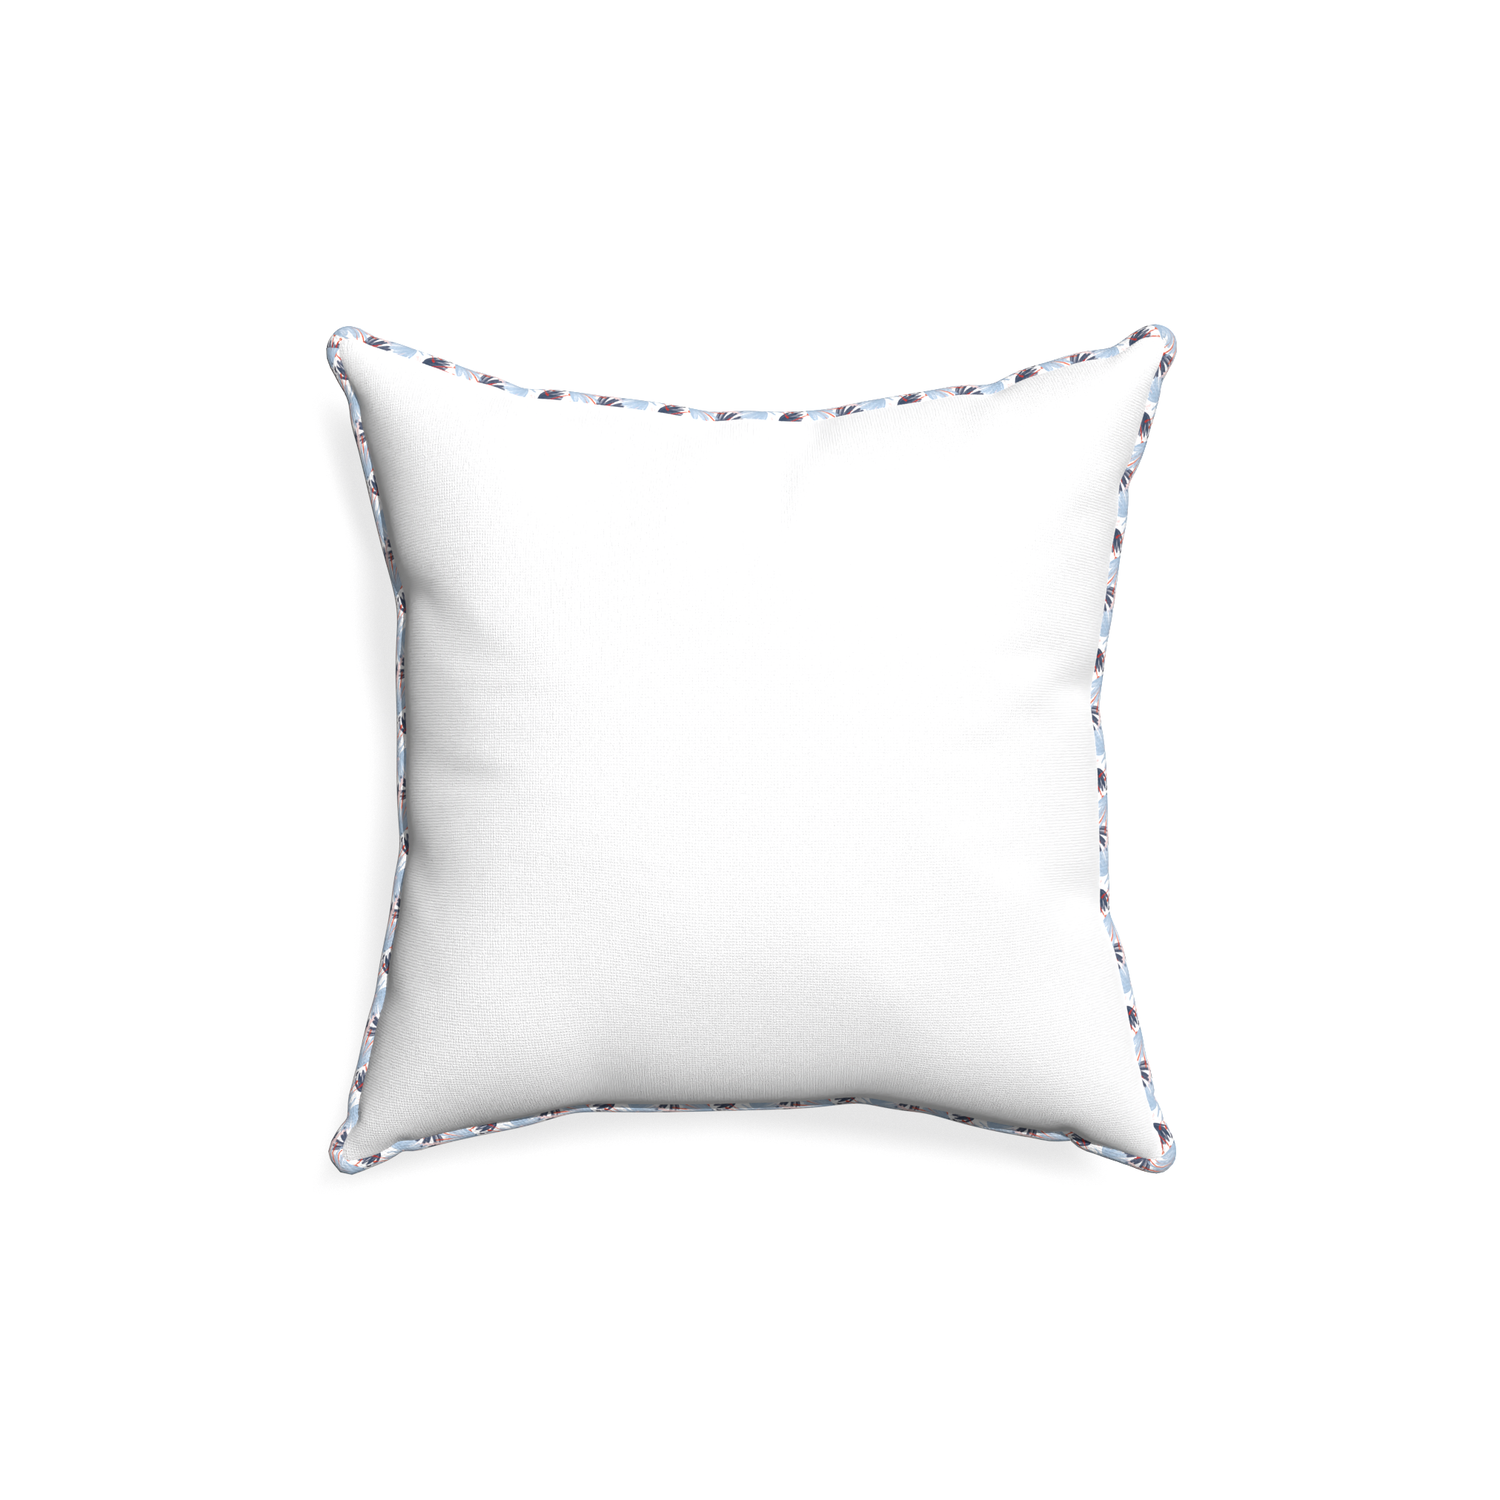 18-square snow custom white cottonpillow with e piping on white background